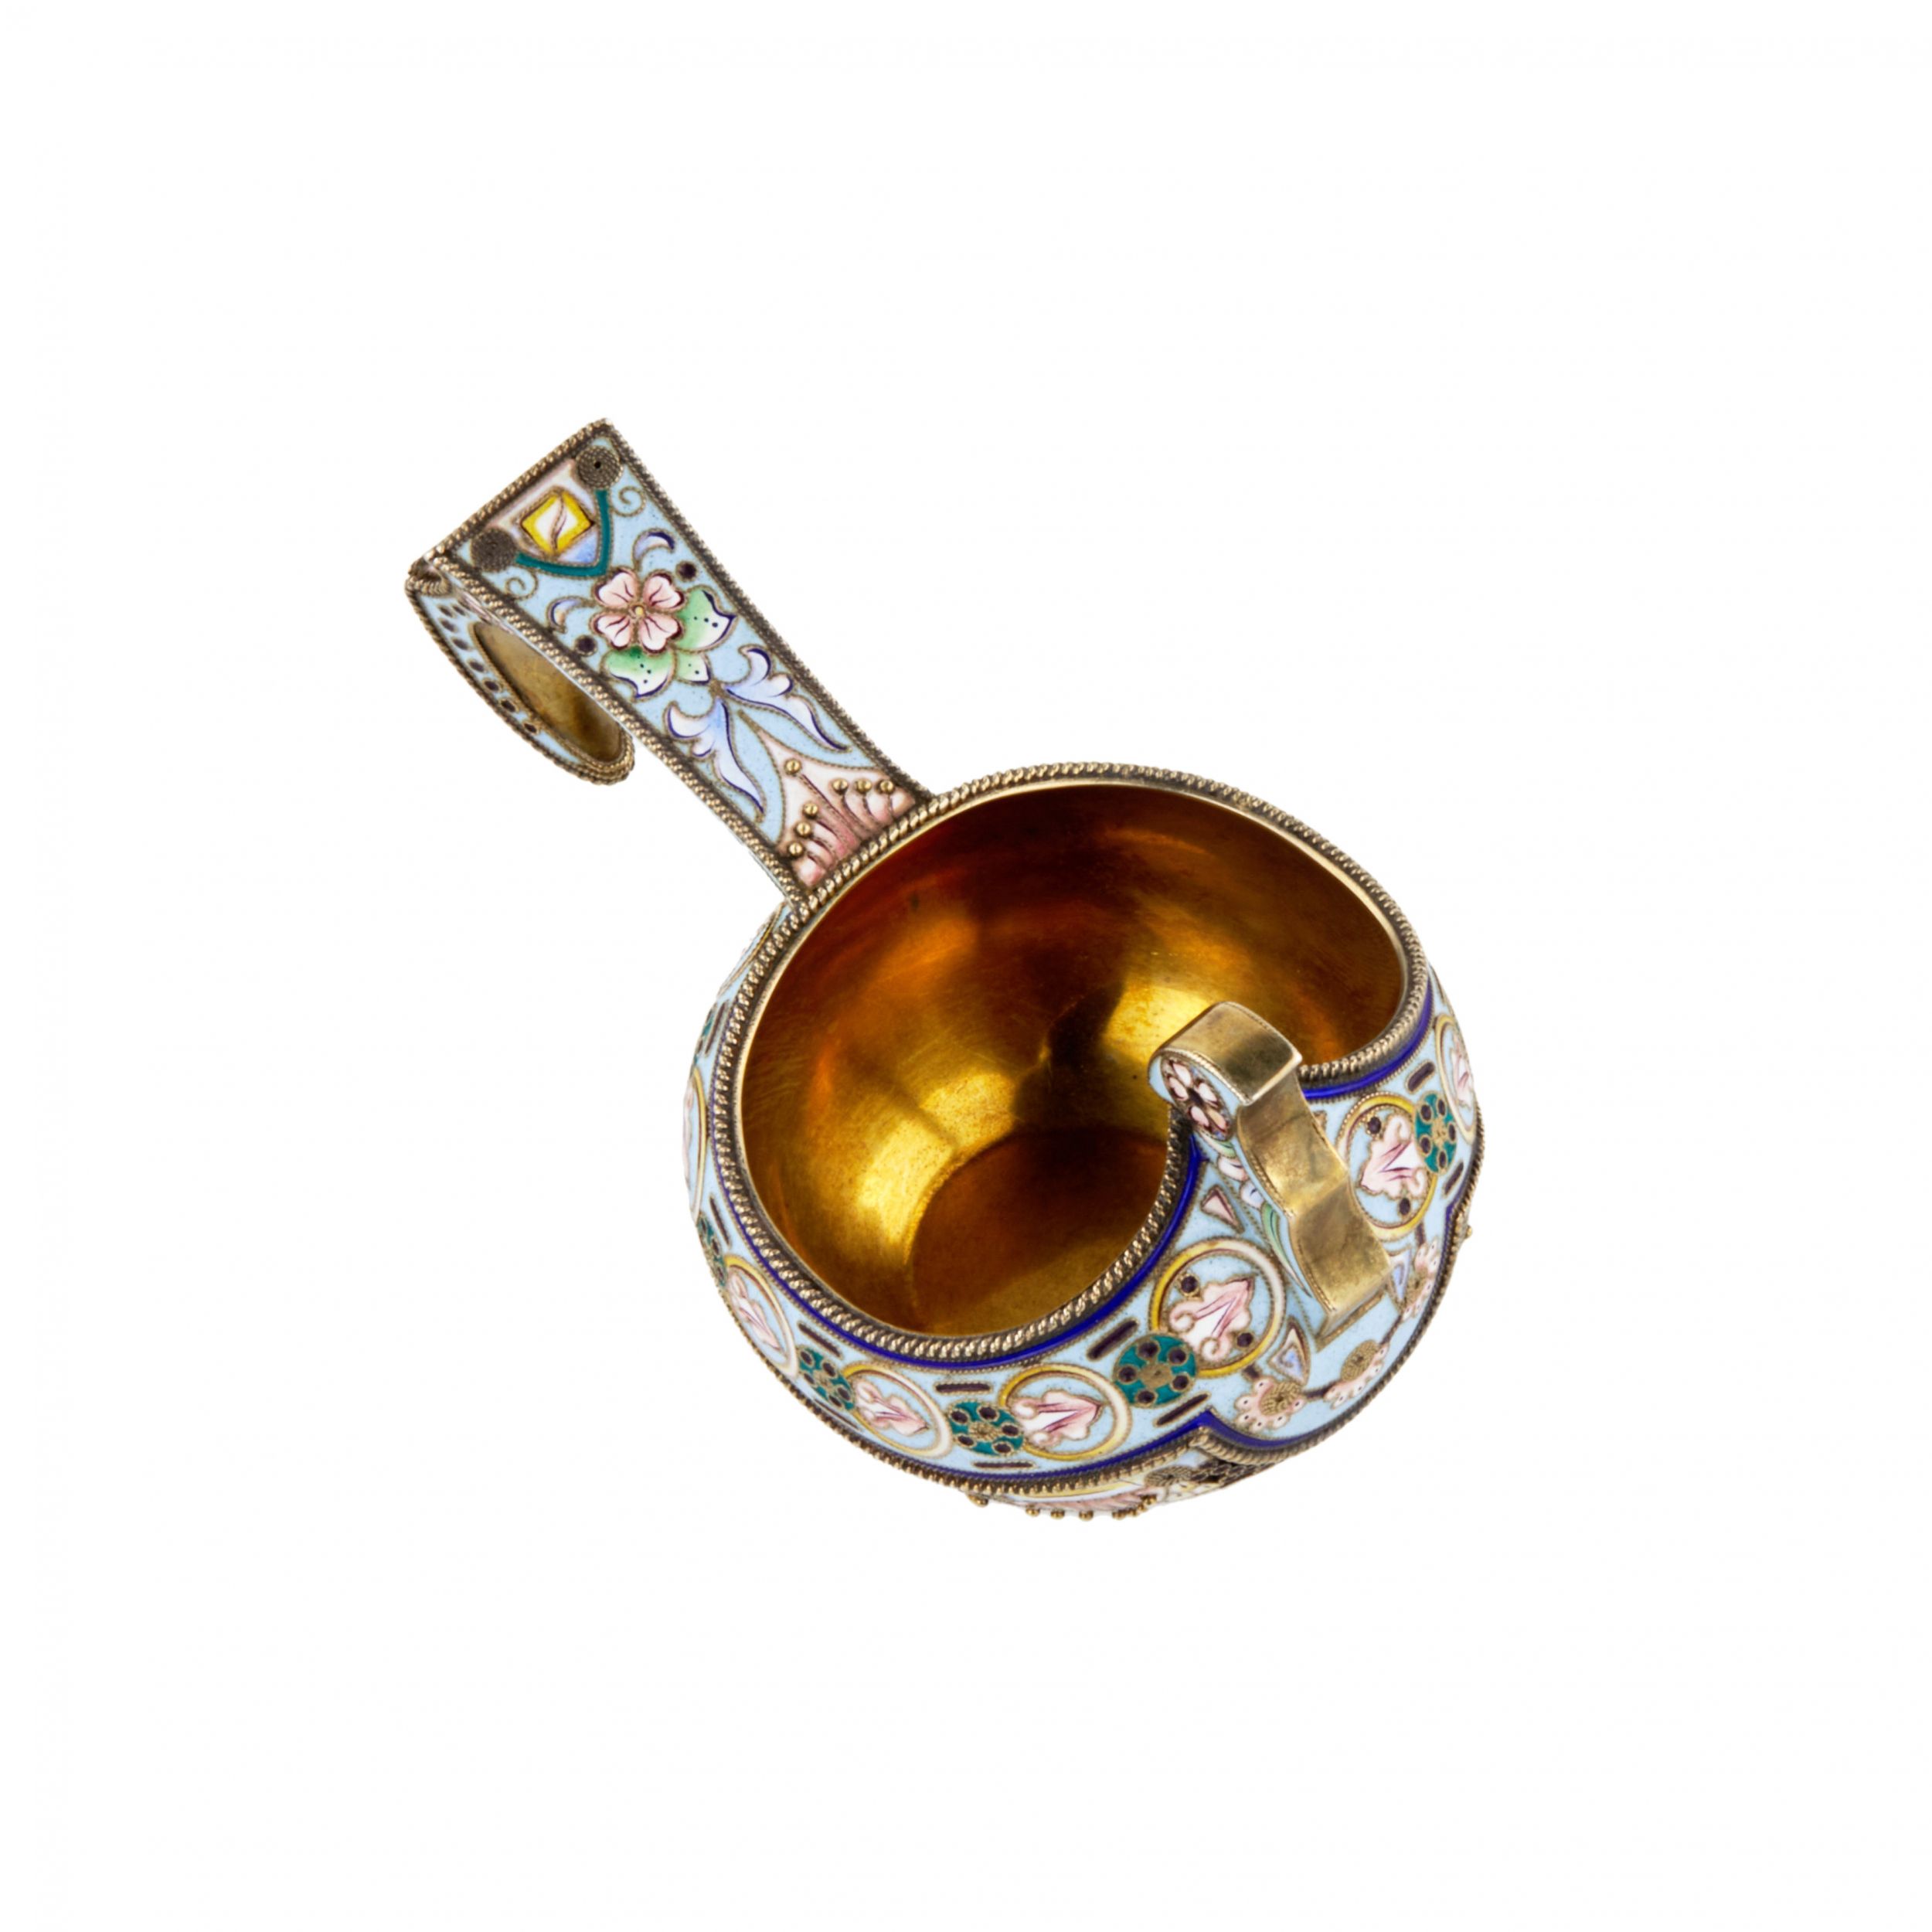 Silver ladle with enamels. Russia Moscow. - Image 5 of 8